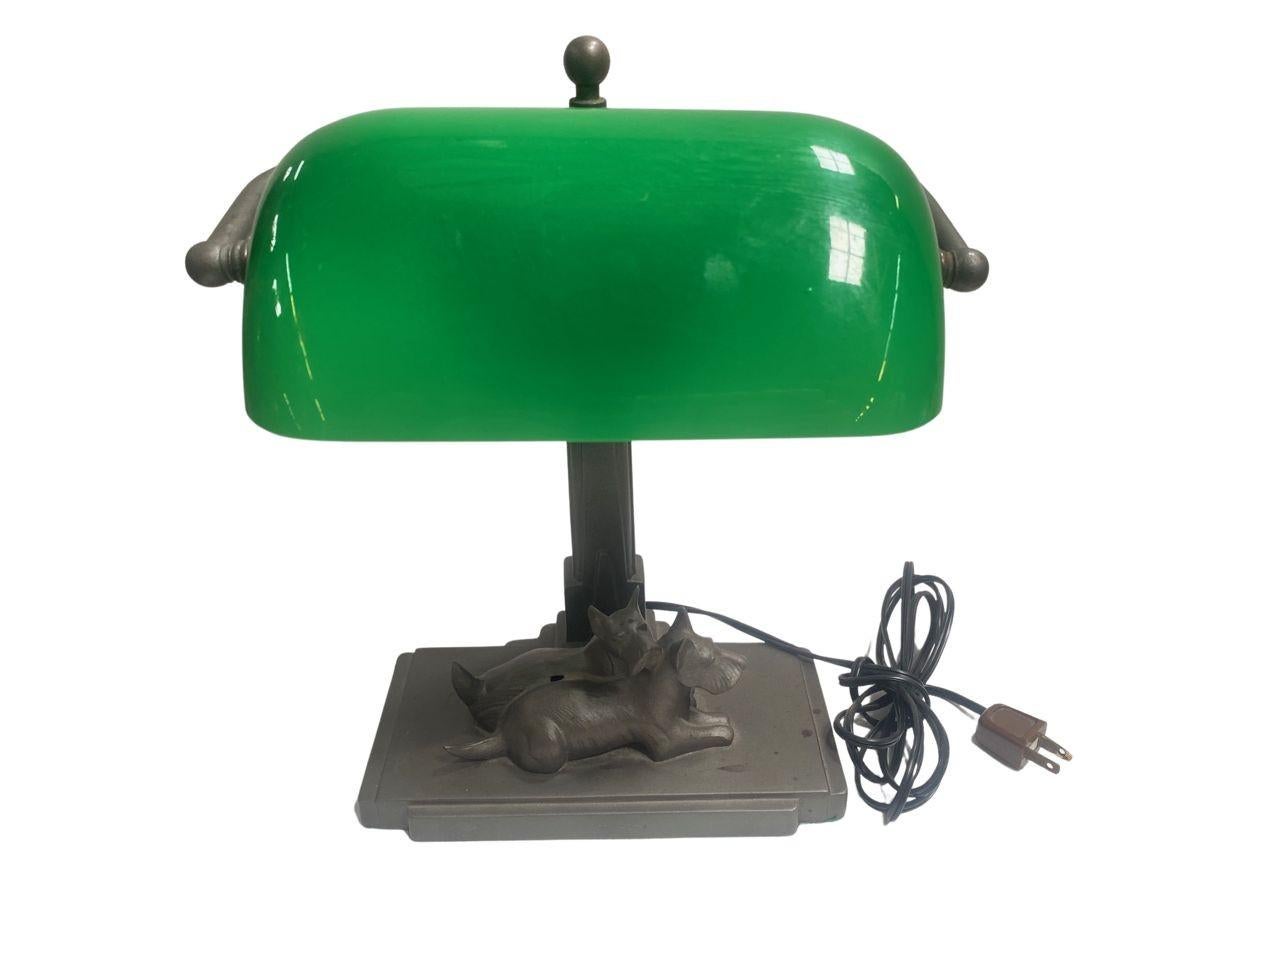 Rare Art Deco Bankers Light with Art Deco design, with a pair of Scottish terrier dogs under the vivid Green glass bankers light.Great detail of the brow of the Scottie to the stem of the lamp with a skyscraper design.
 
The lamp is signed on the